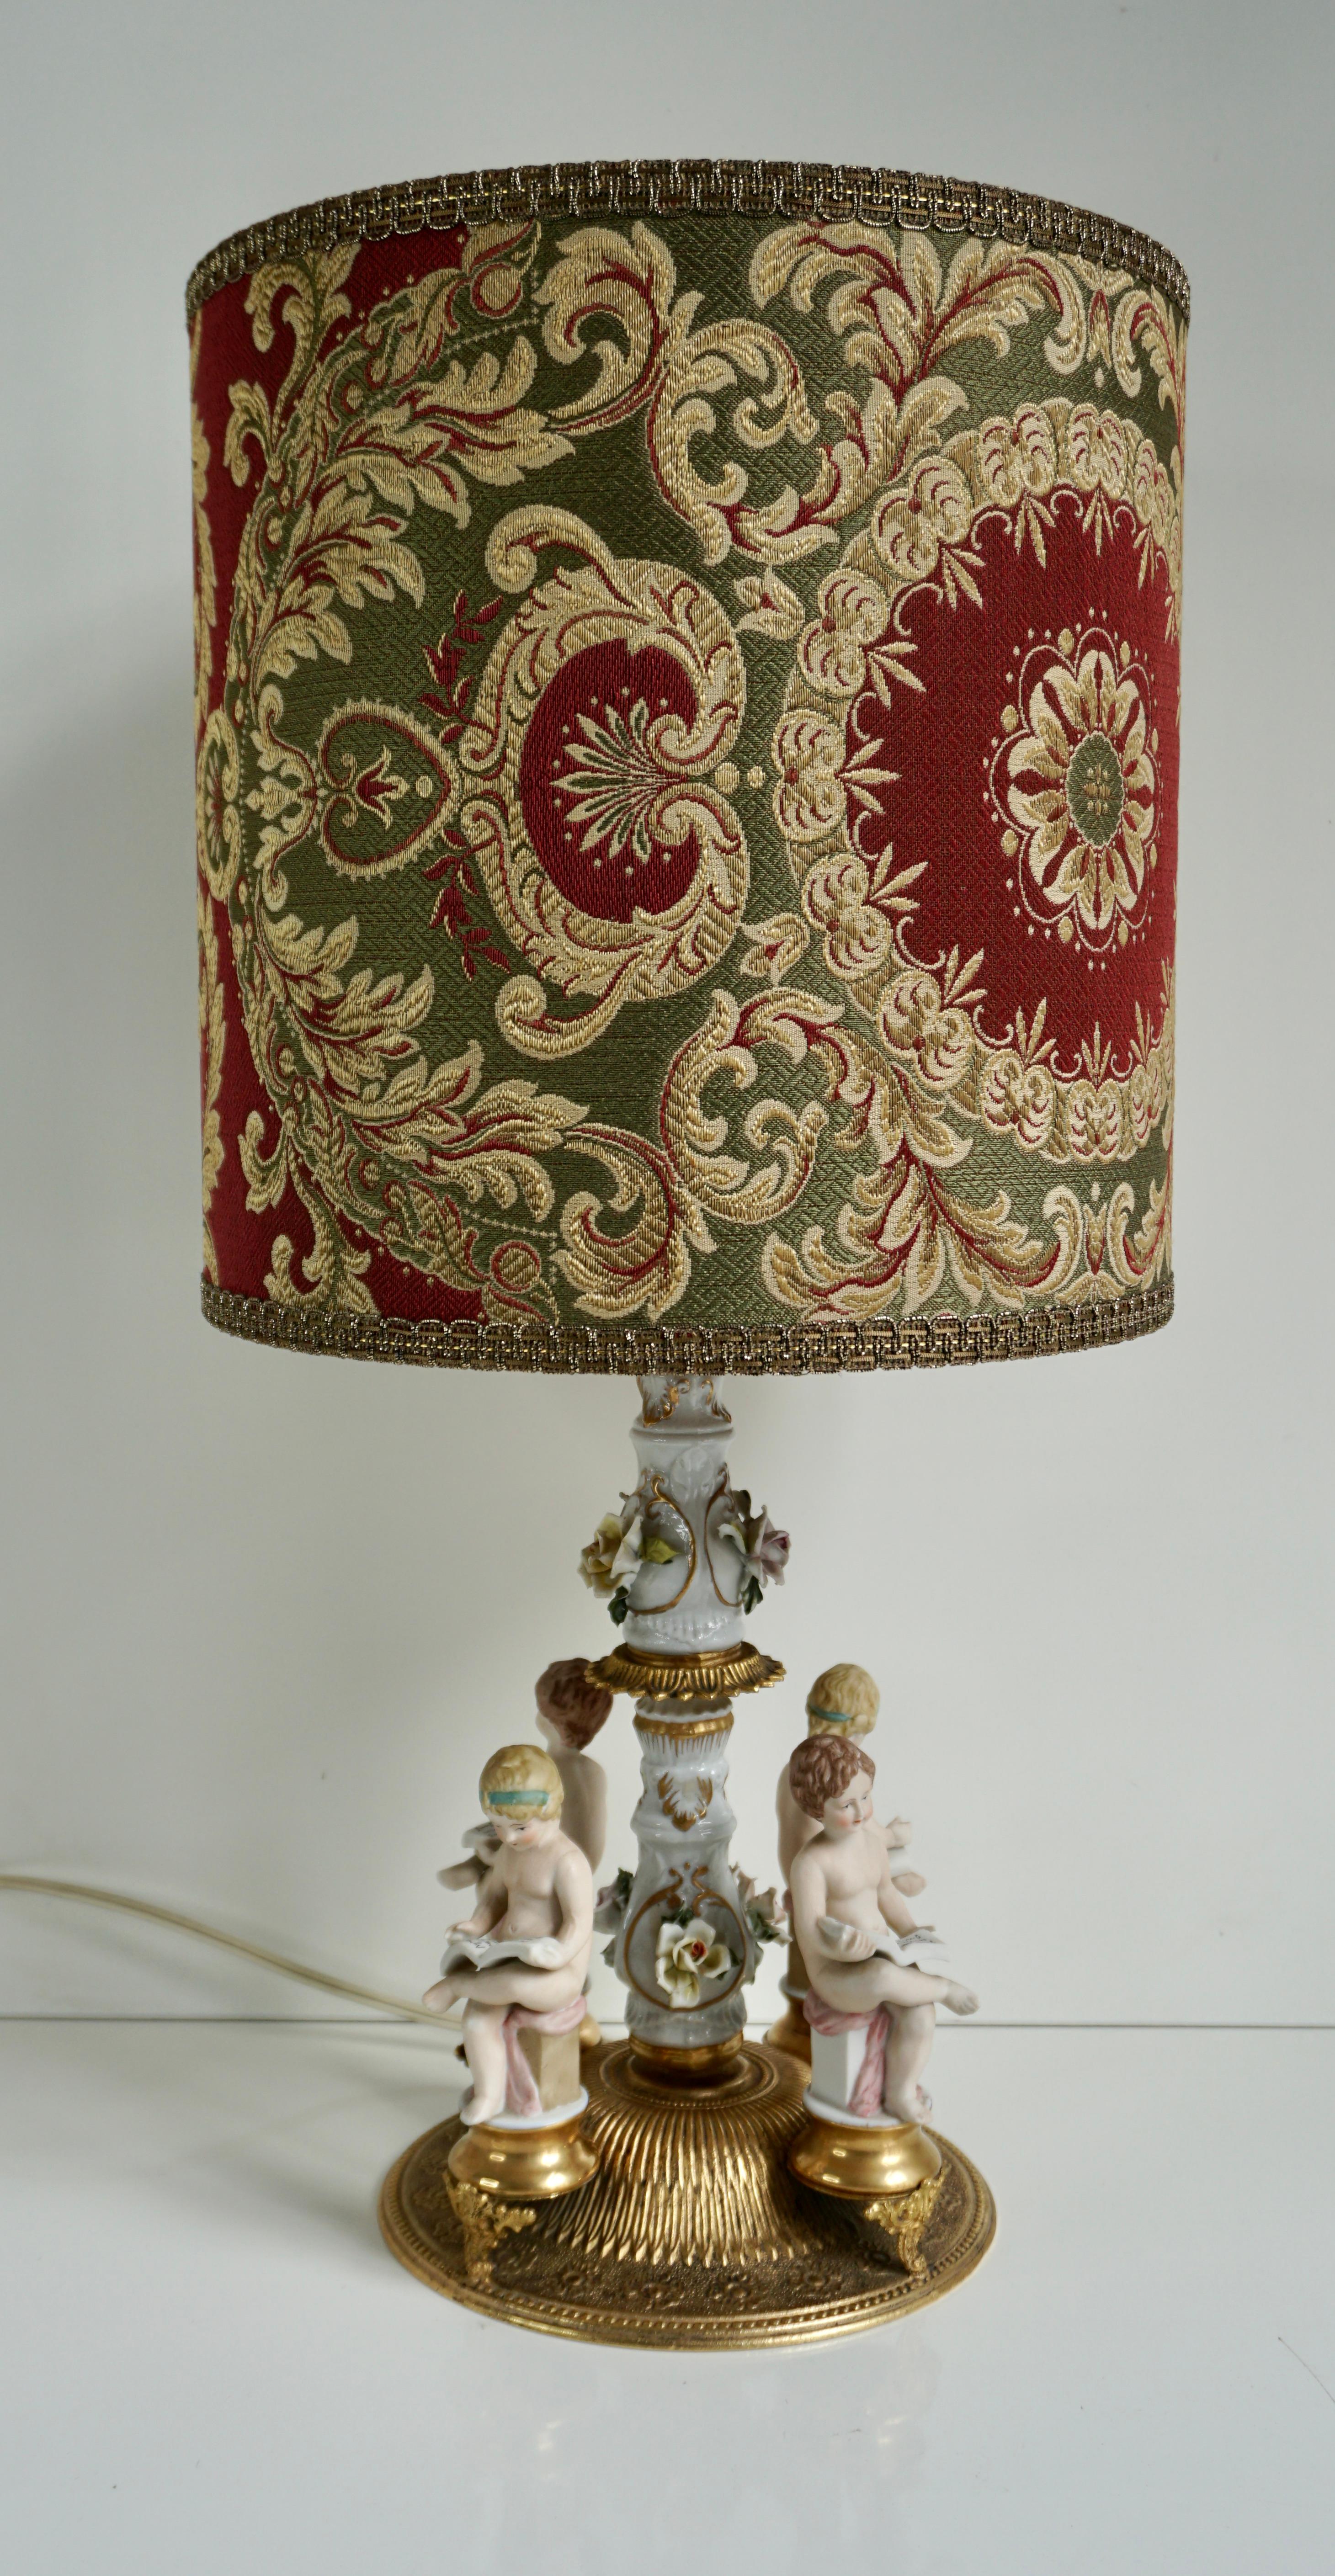 Italian Victorian style porcelain lamp with four cupid who are reading a book.
With the original lampshade.

Height 24.4